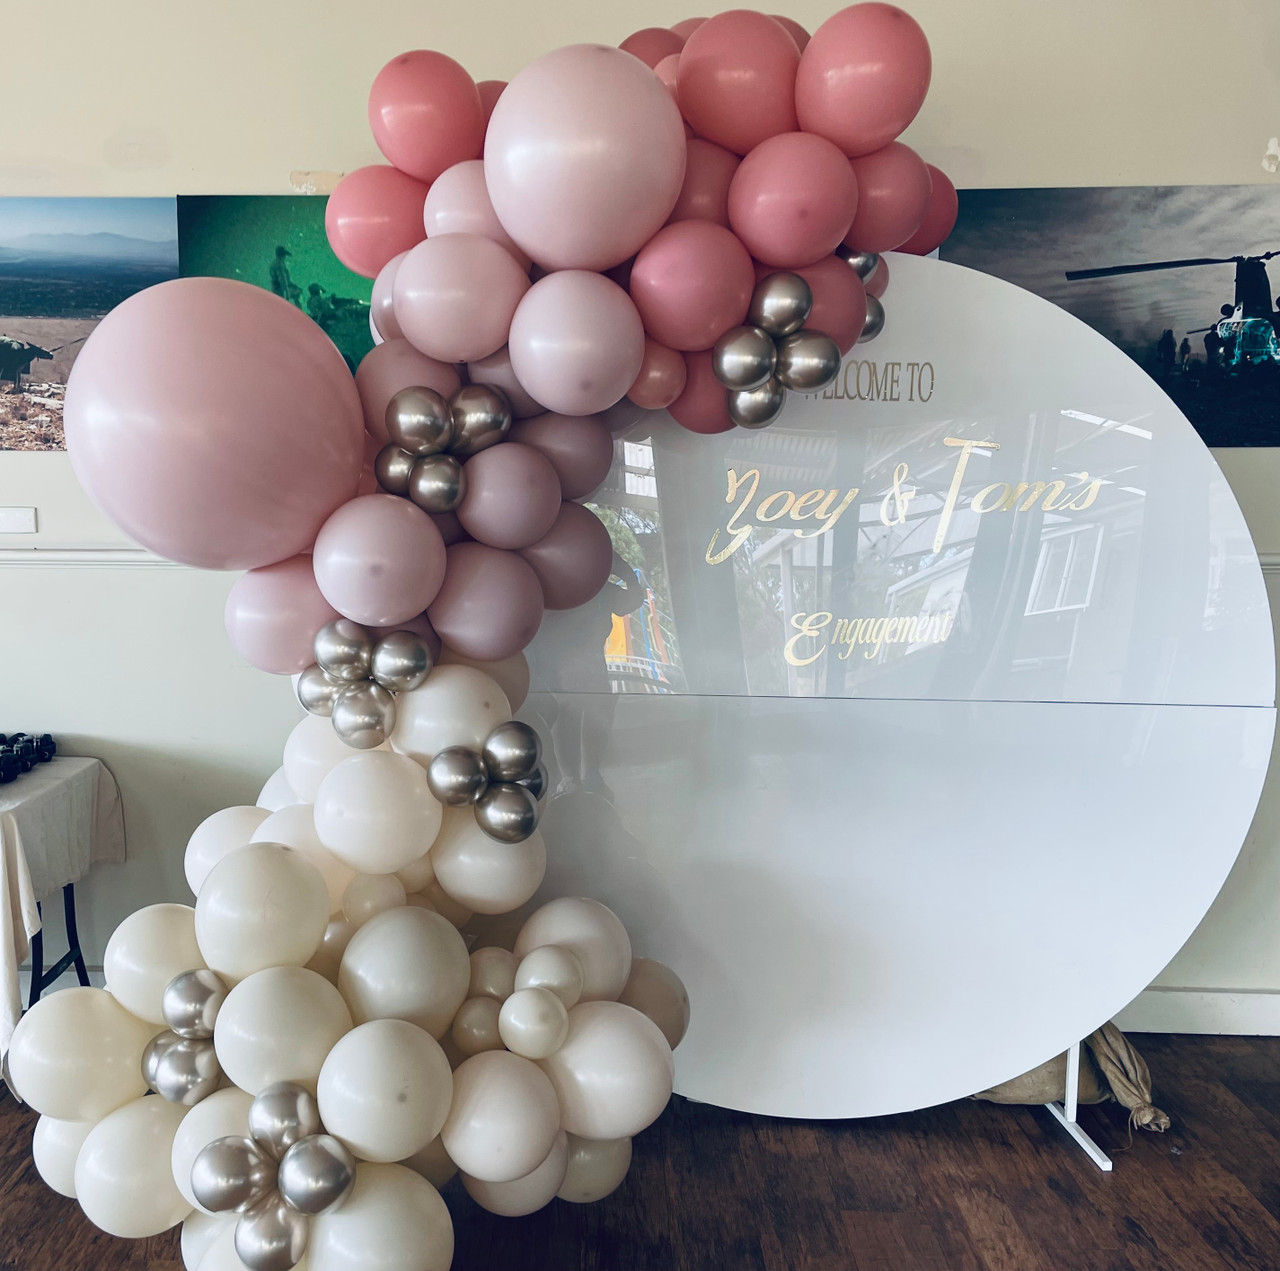 PASTEL BALLOON GARLAND - 3 MTRE (INSTALL AND DELIVERY EXTRA) BACKDROP FOR HIRE $100.00 EXTRA